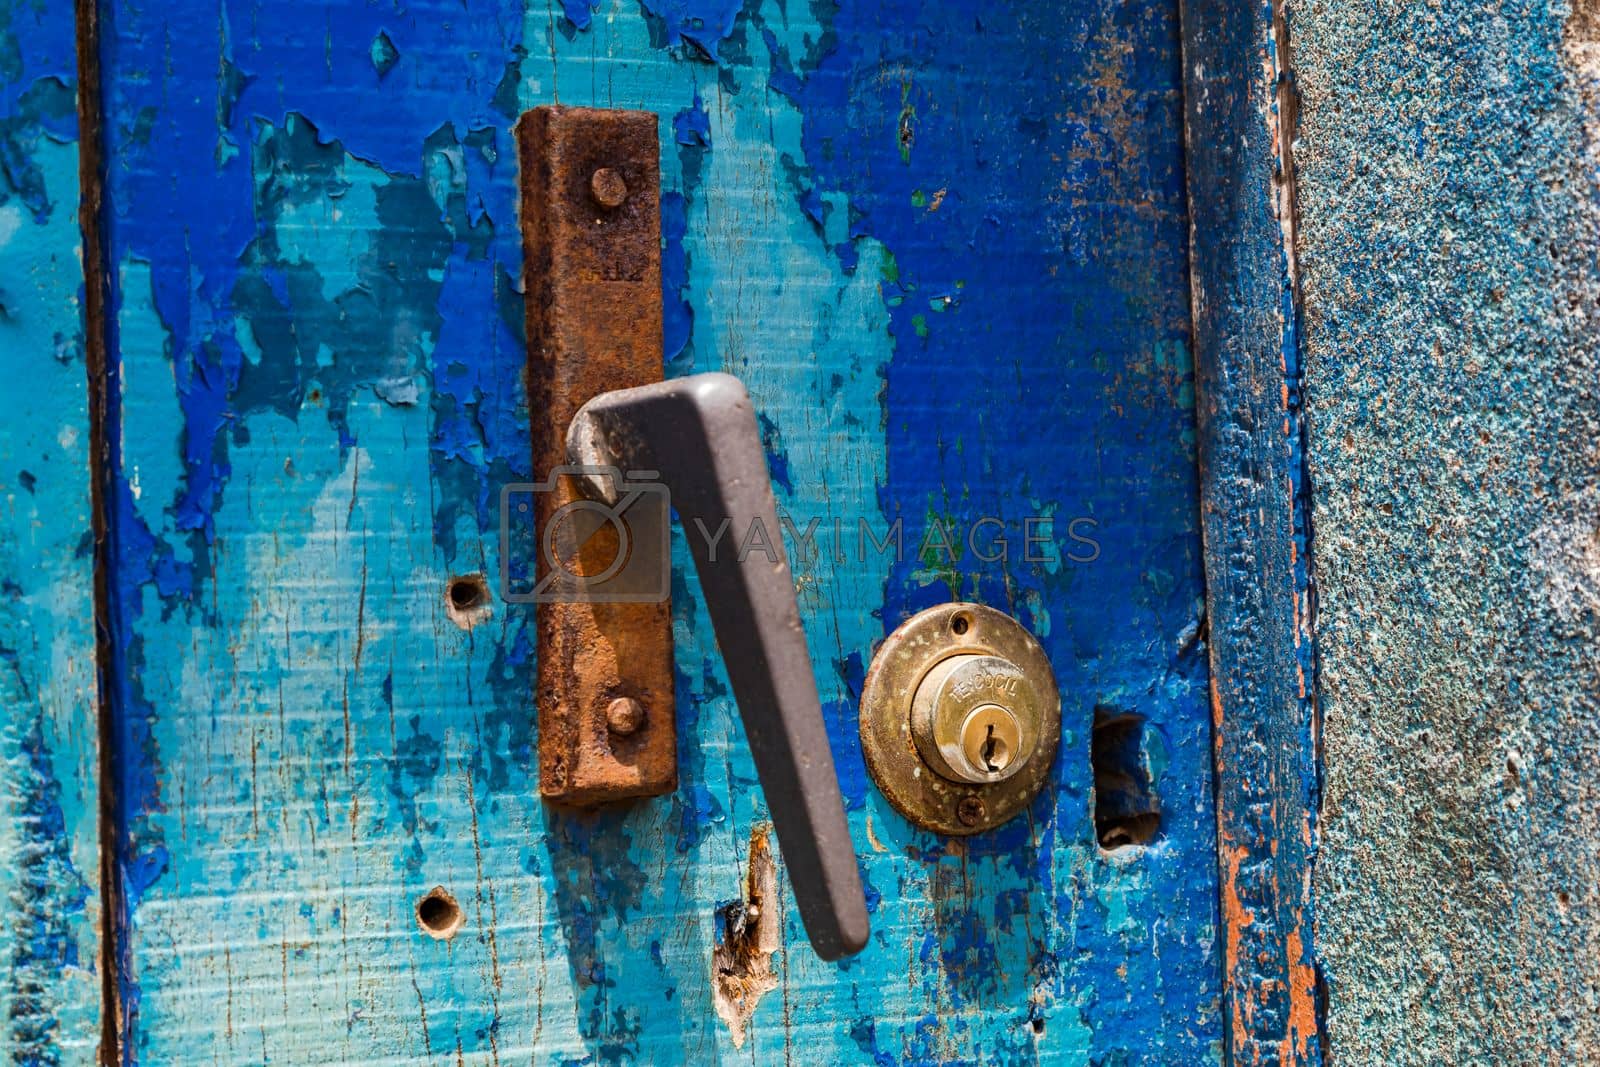 Royalty free image of A blue wooden door with a lock and a rusty doorknob, Cape Verde by astrosoft